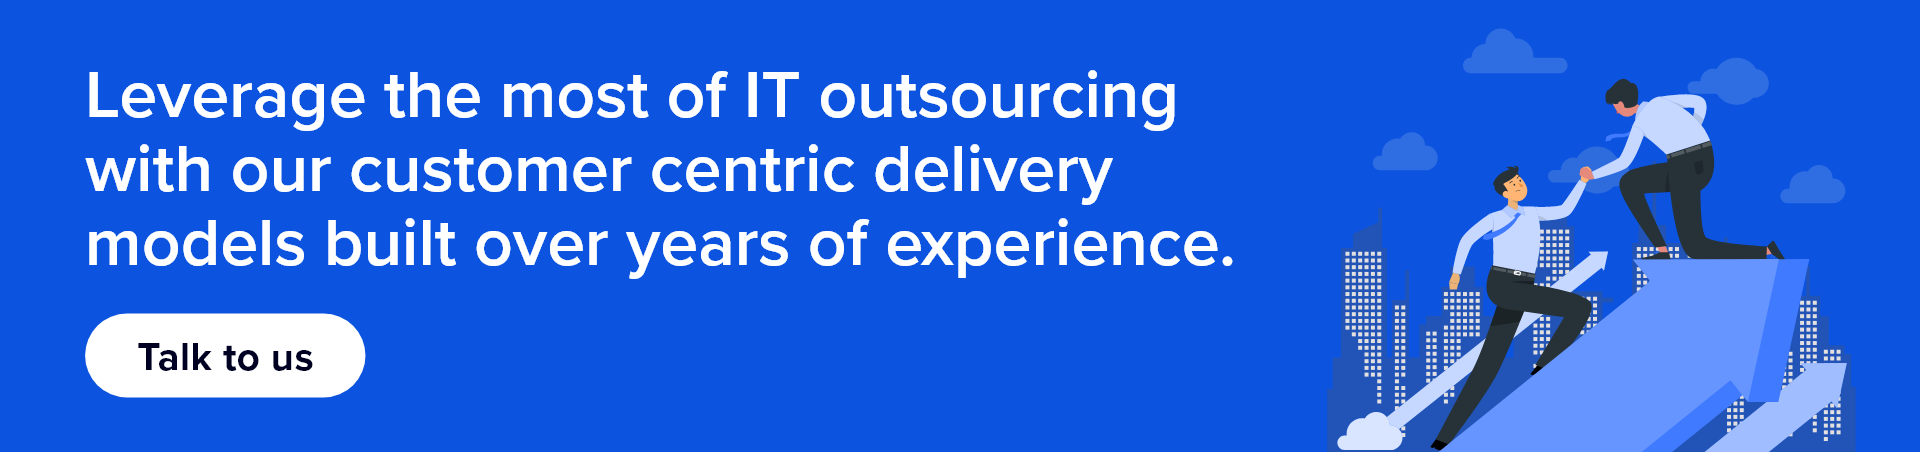 IT Outsourcing CTA